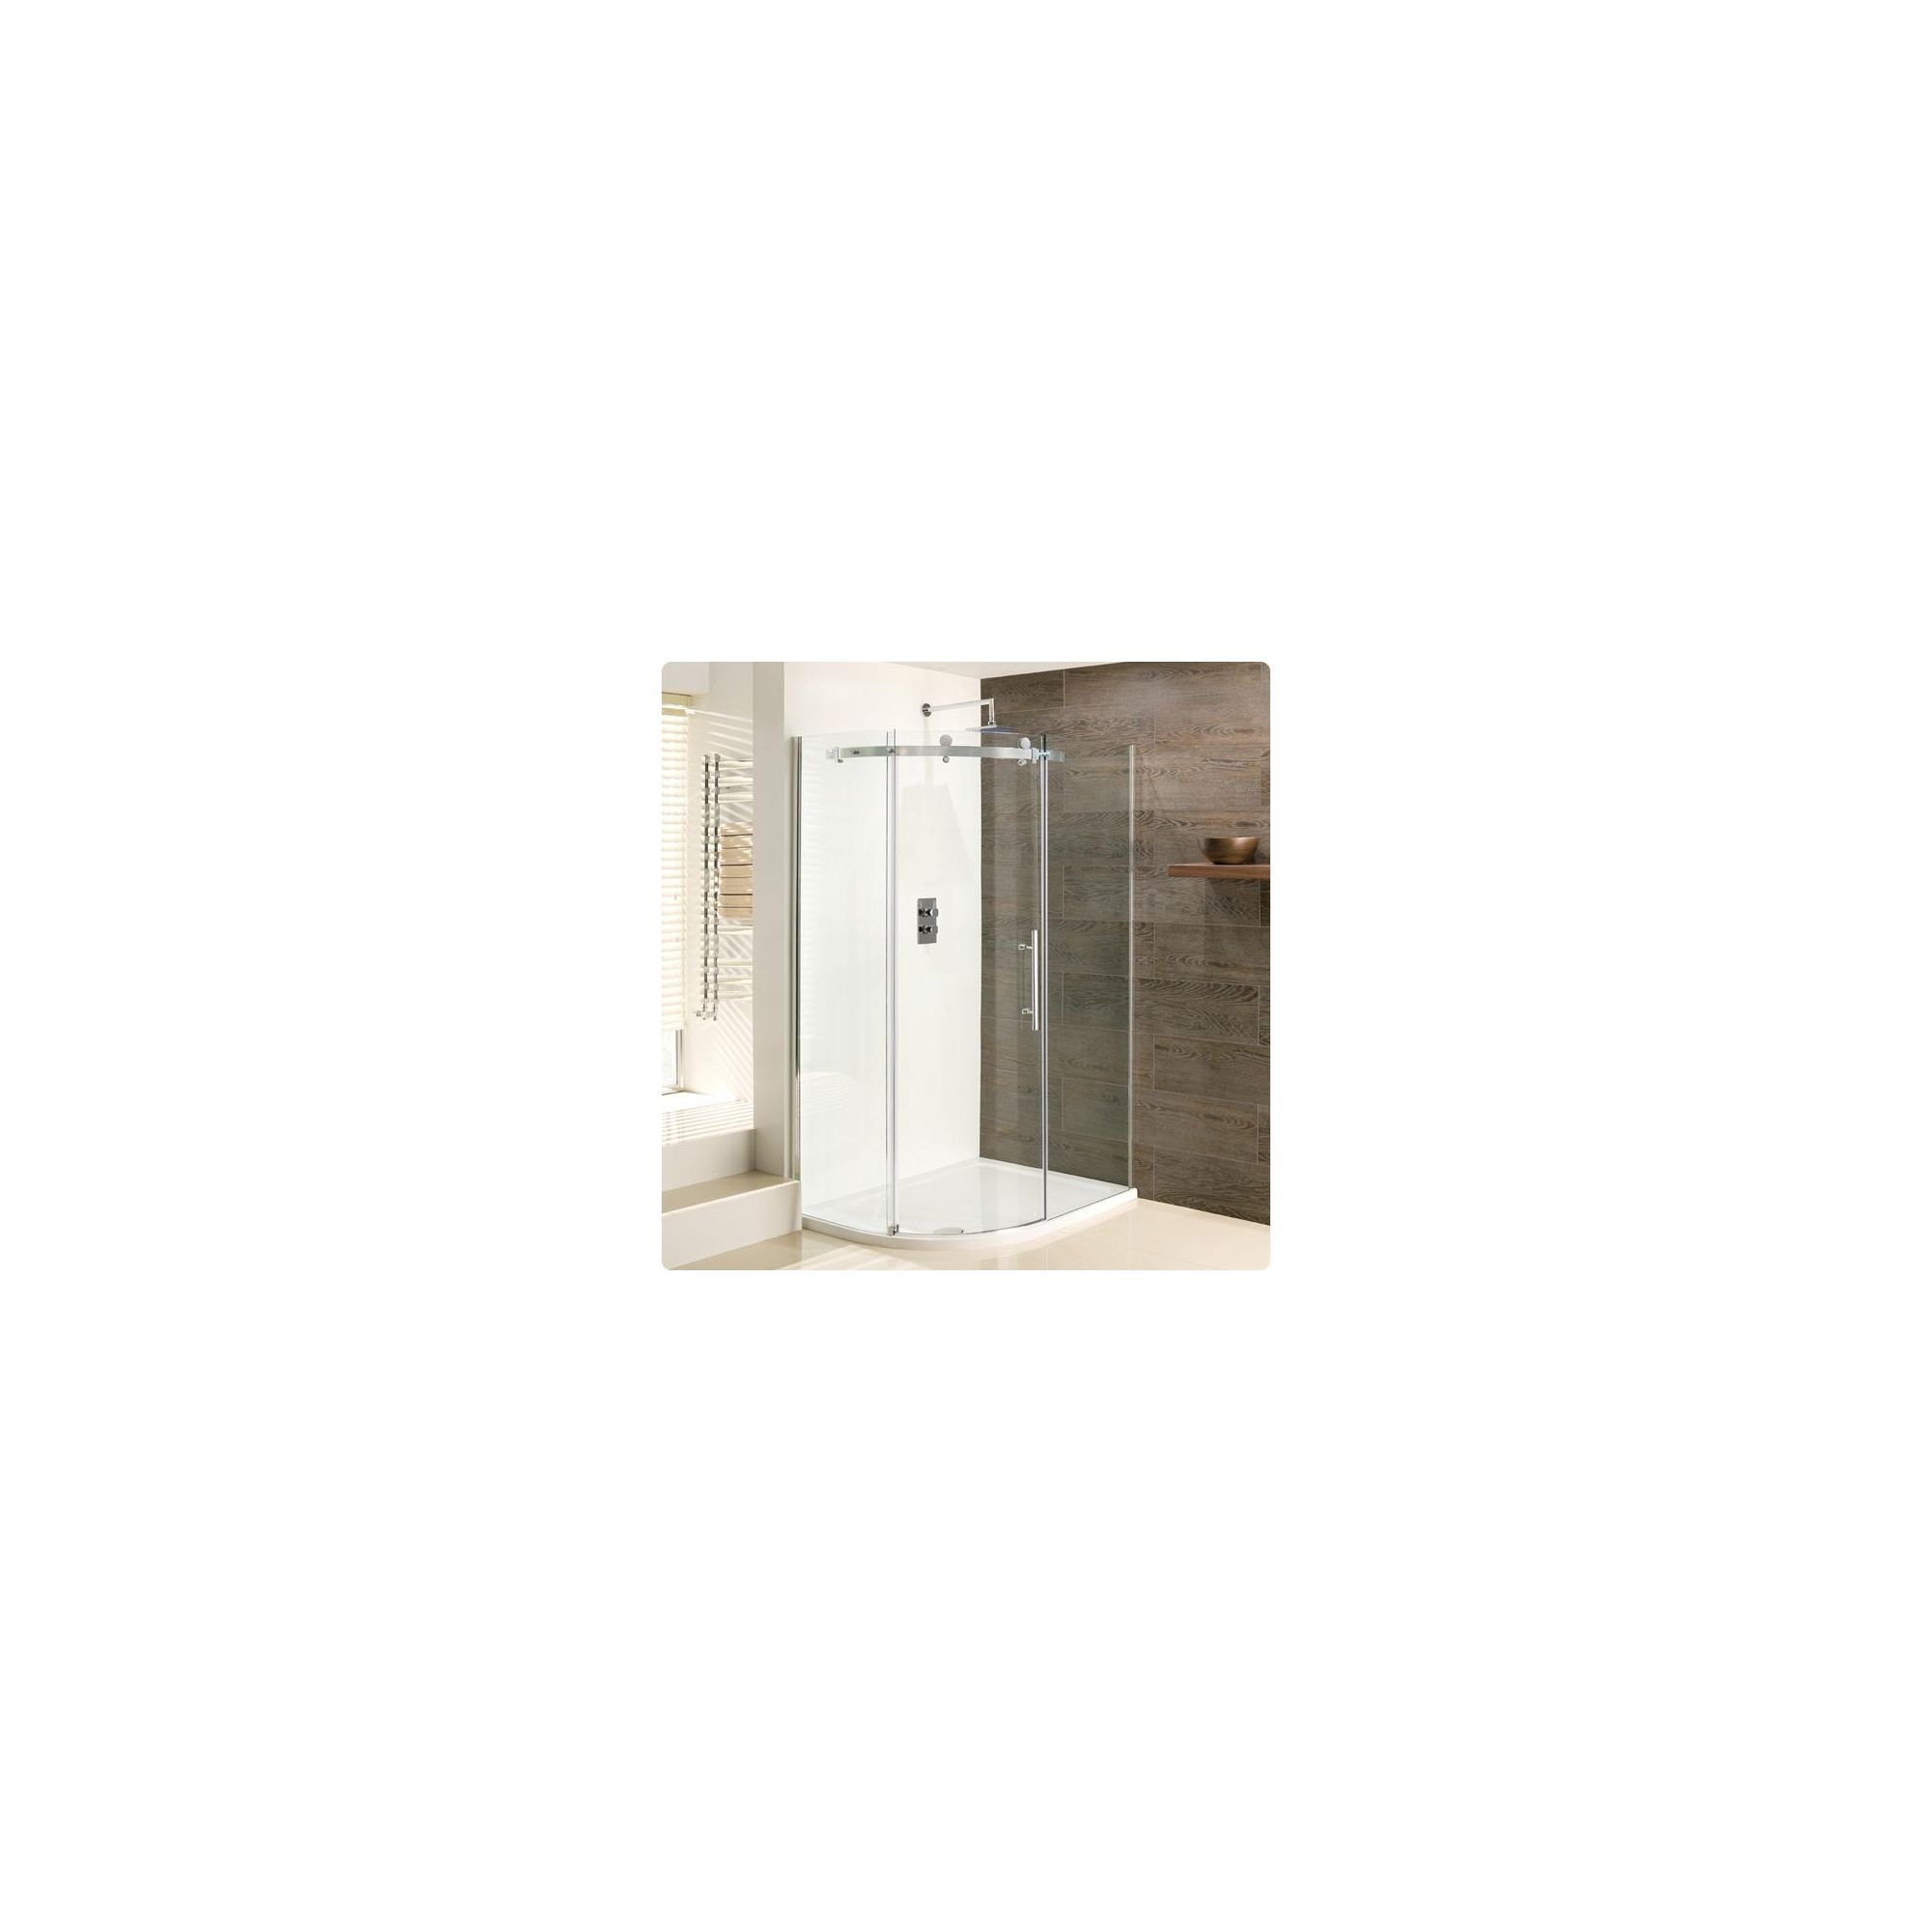 Duchy Deluxe Silver Offset Quadrant Shower Enclosure 1200mm x 900mm (Complete with Tray), 10mm Glass at Tescos Direct